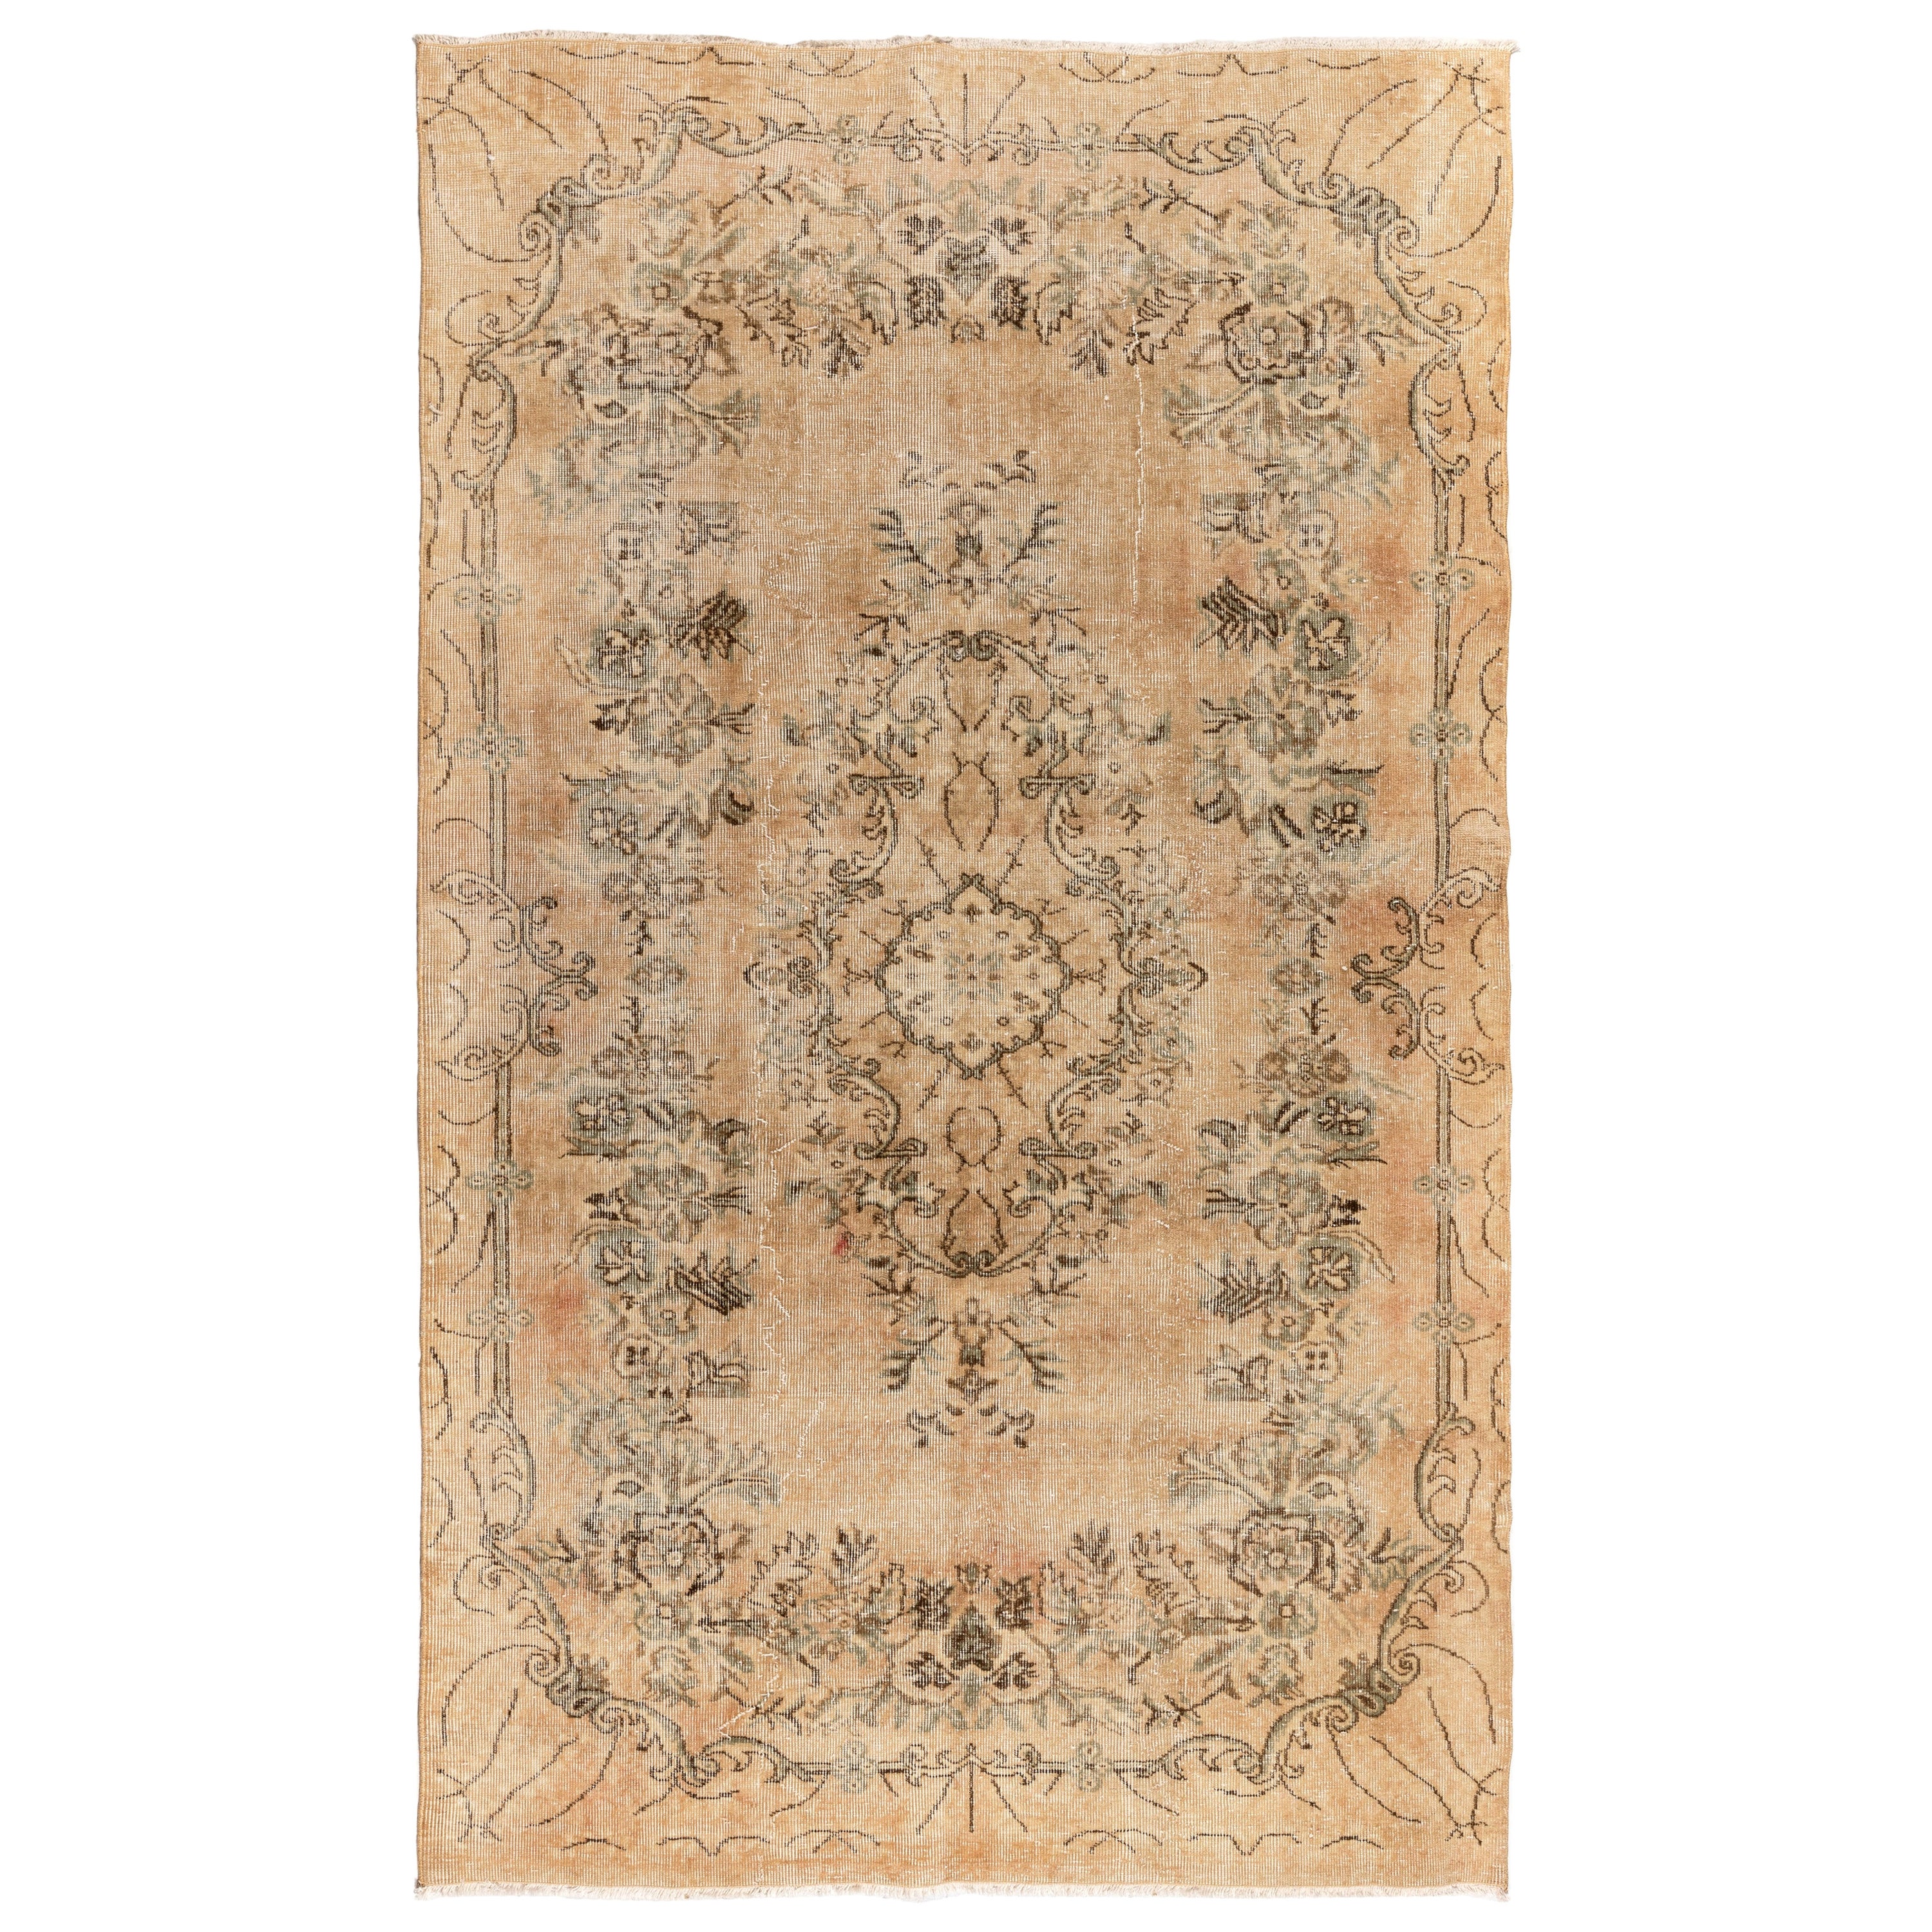 5.7x9 Ft Sun Faded Turkish Rug with Medallion Design, Beige Handmade Wool Carpet For Sale